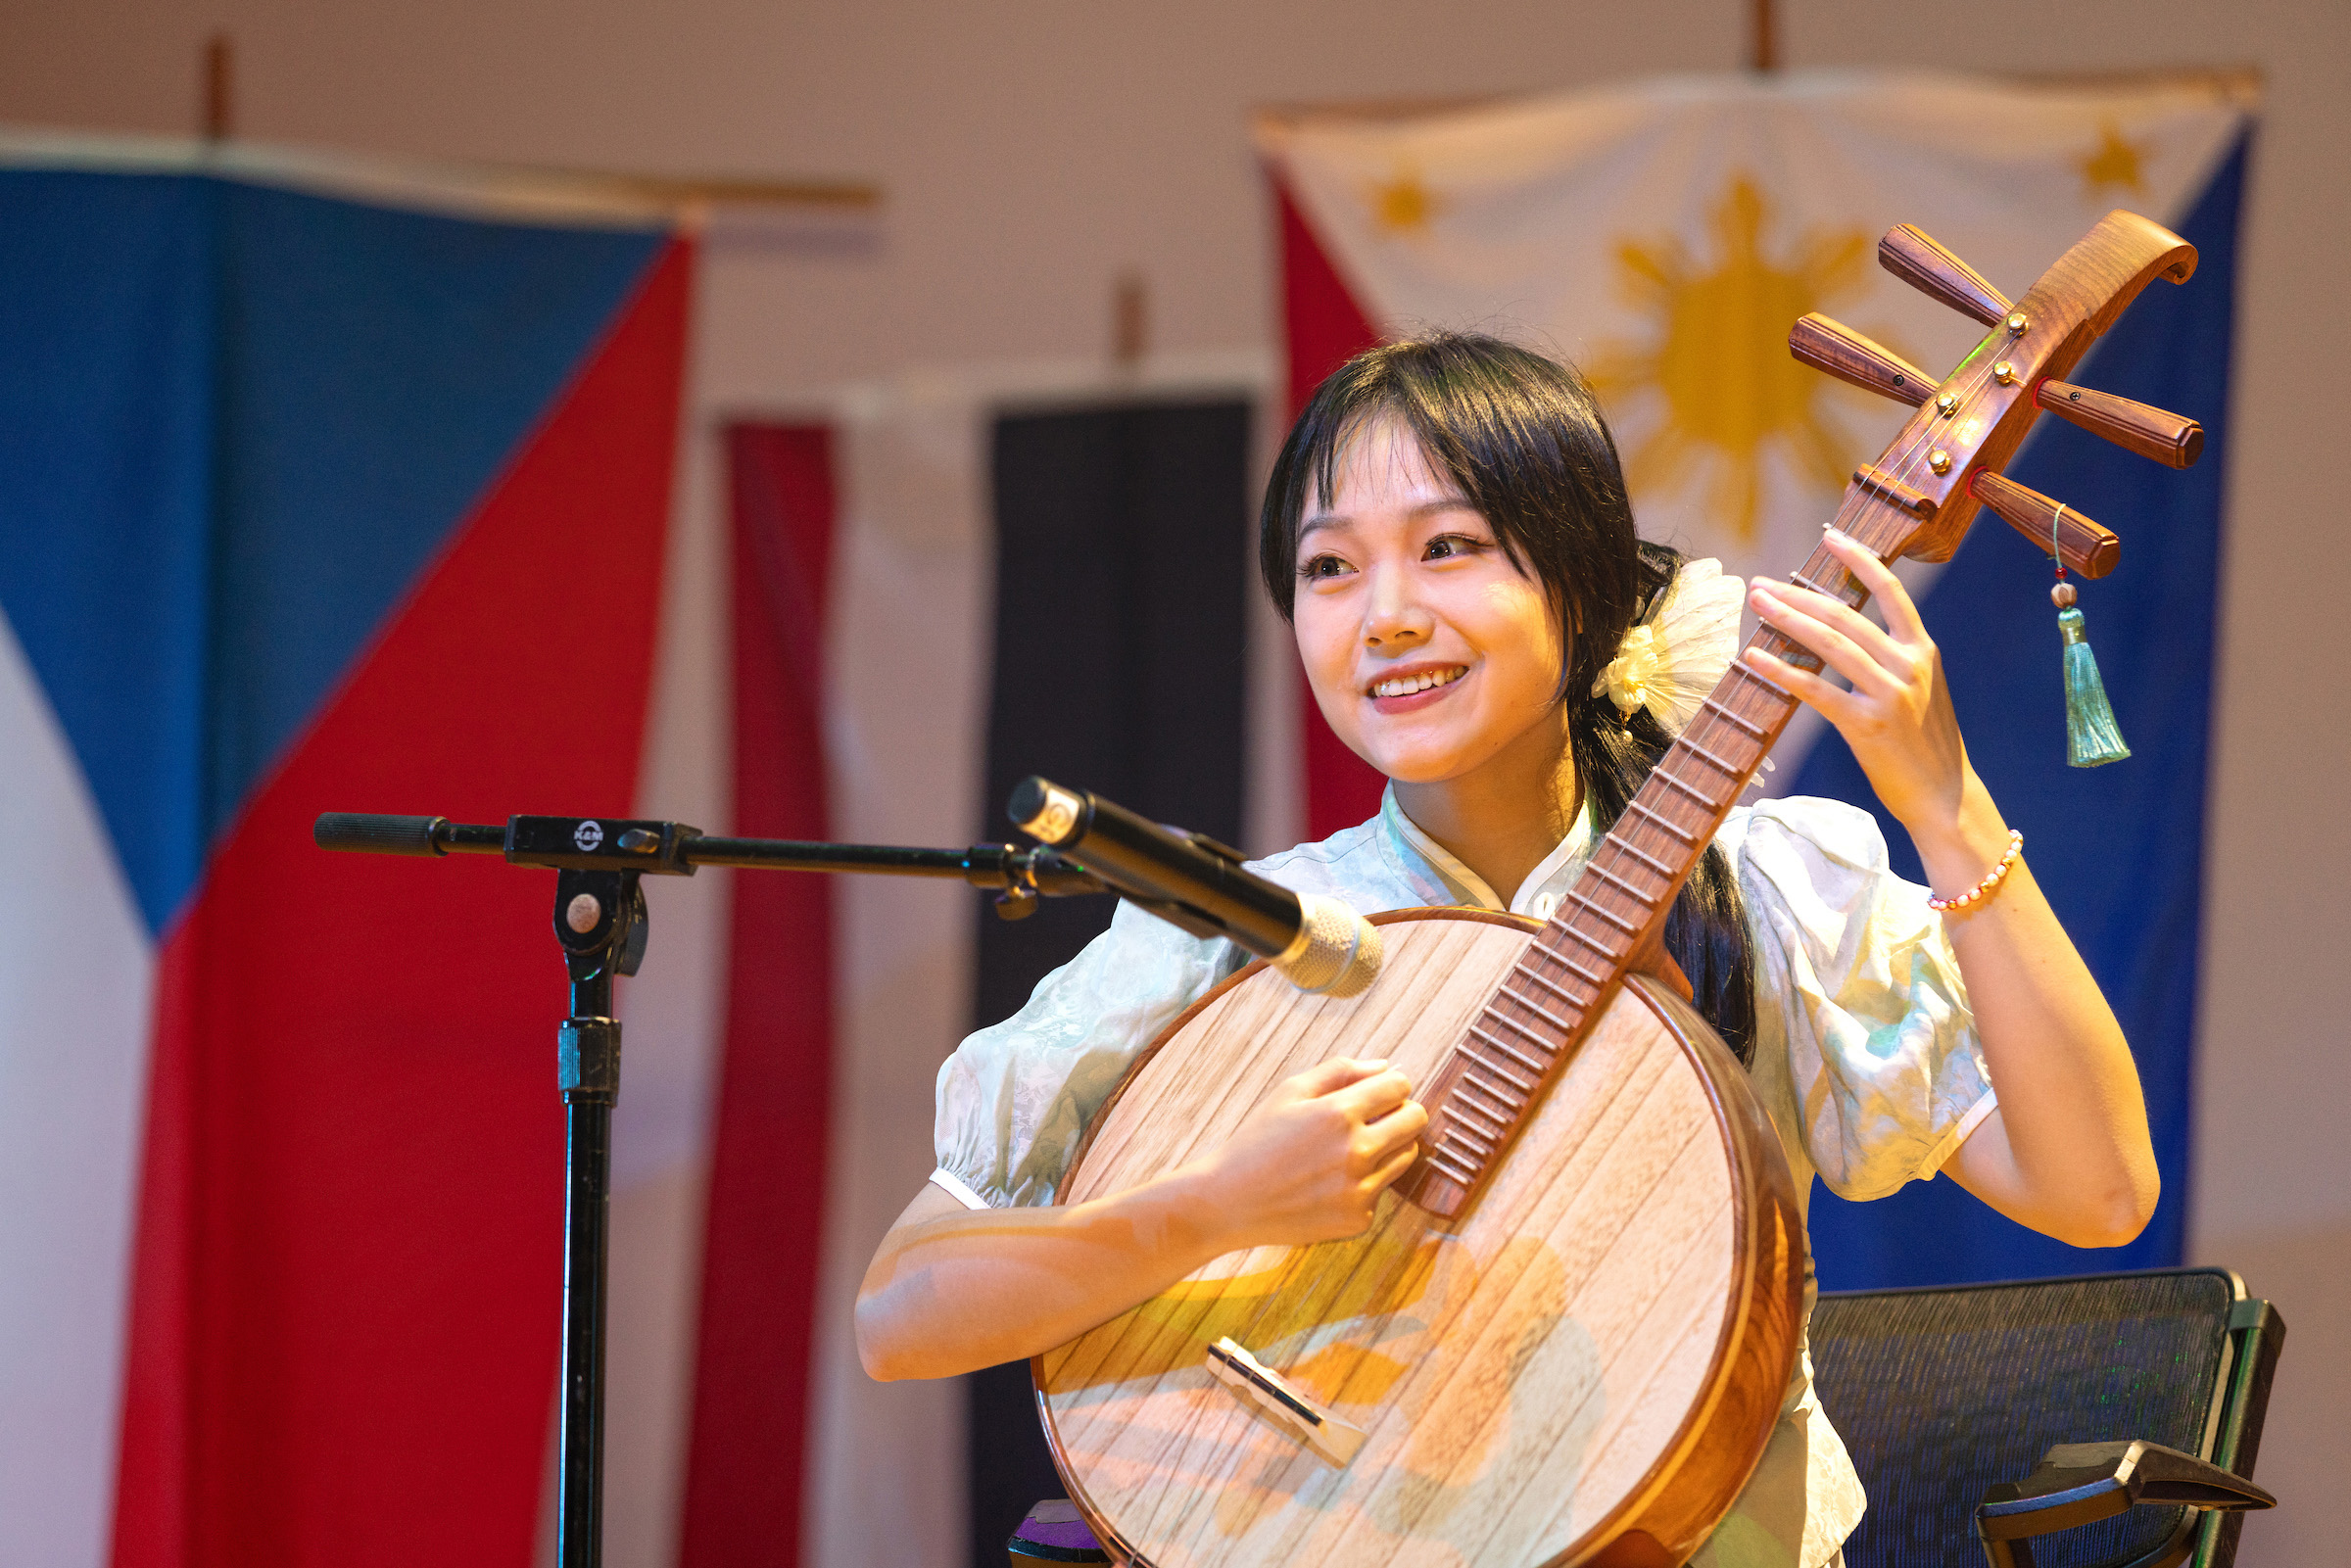 Student playing a musical instrument on a stage.